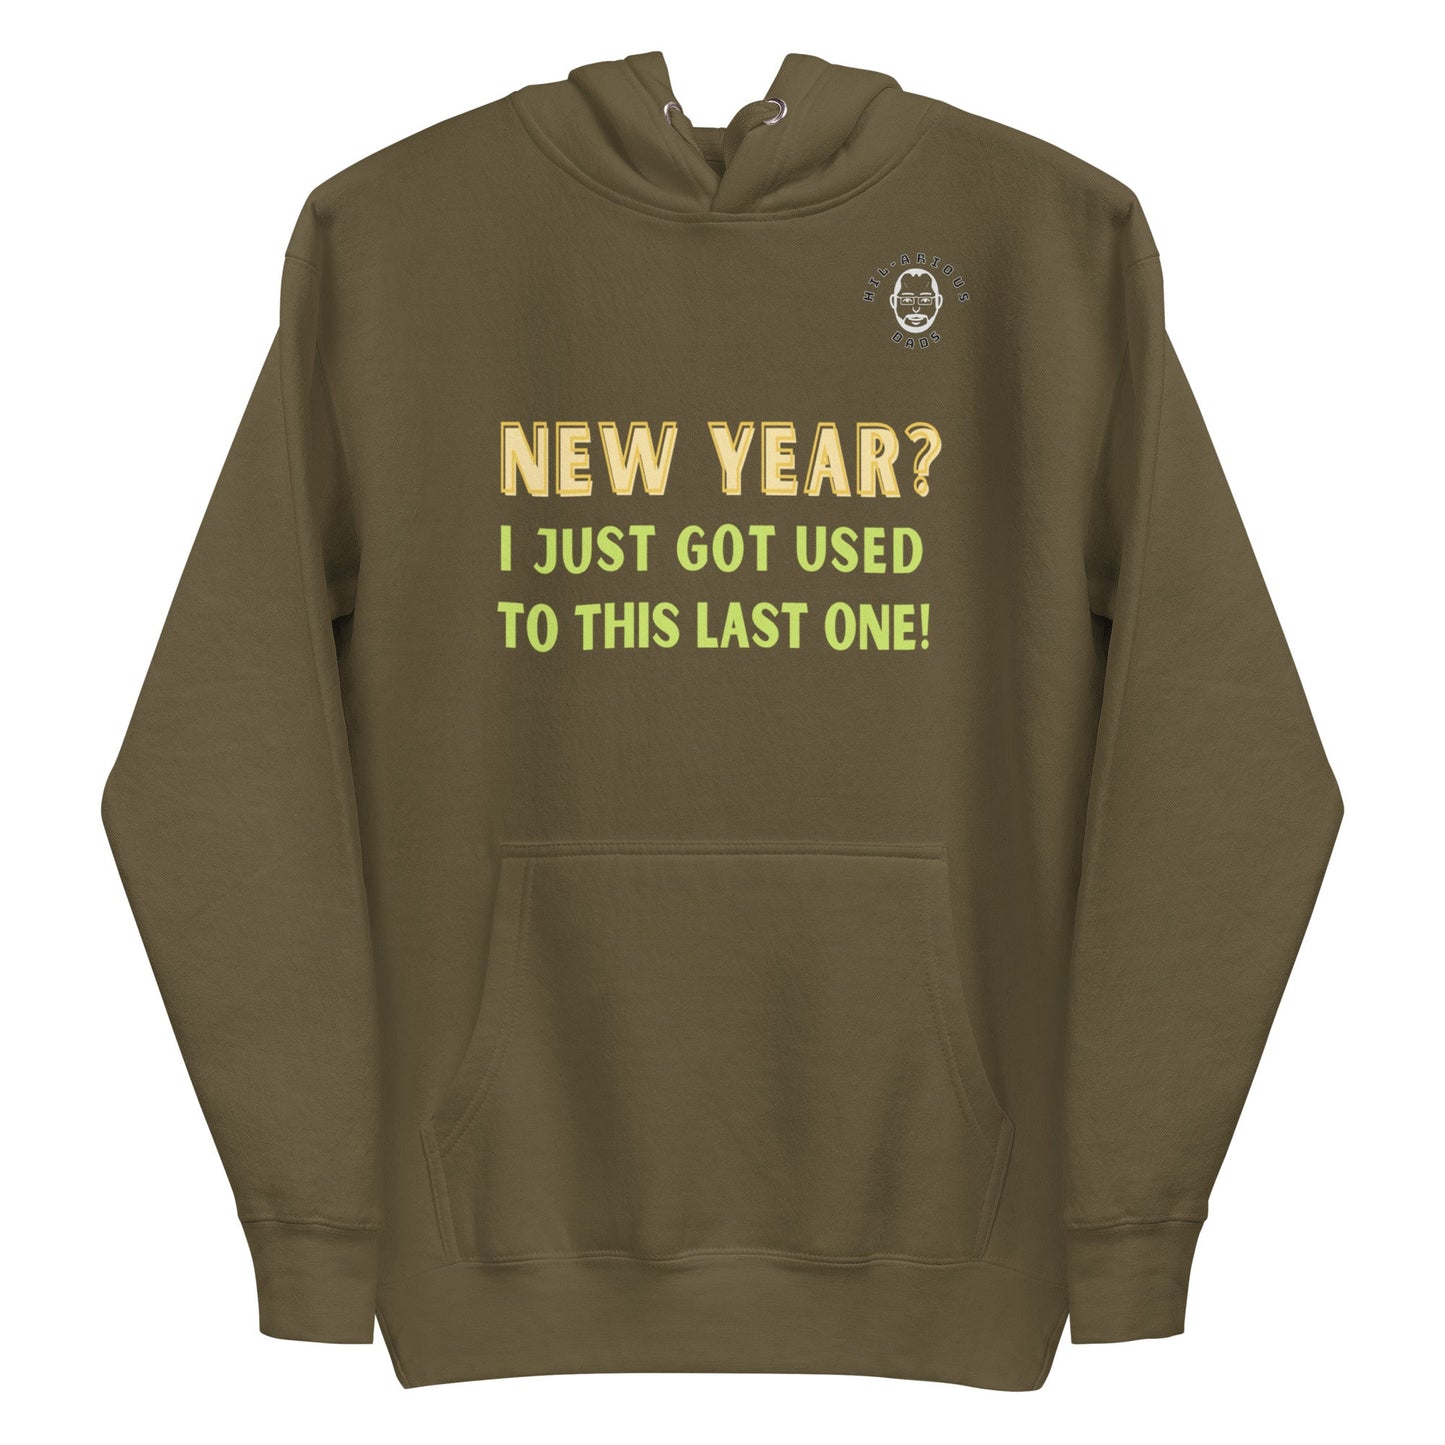 New Year? I just got used to this last one!-Hoodie - Hil-arious Dads